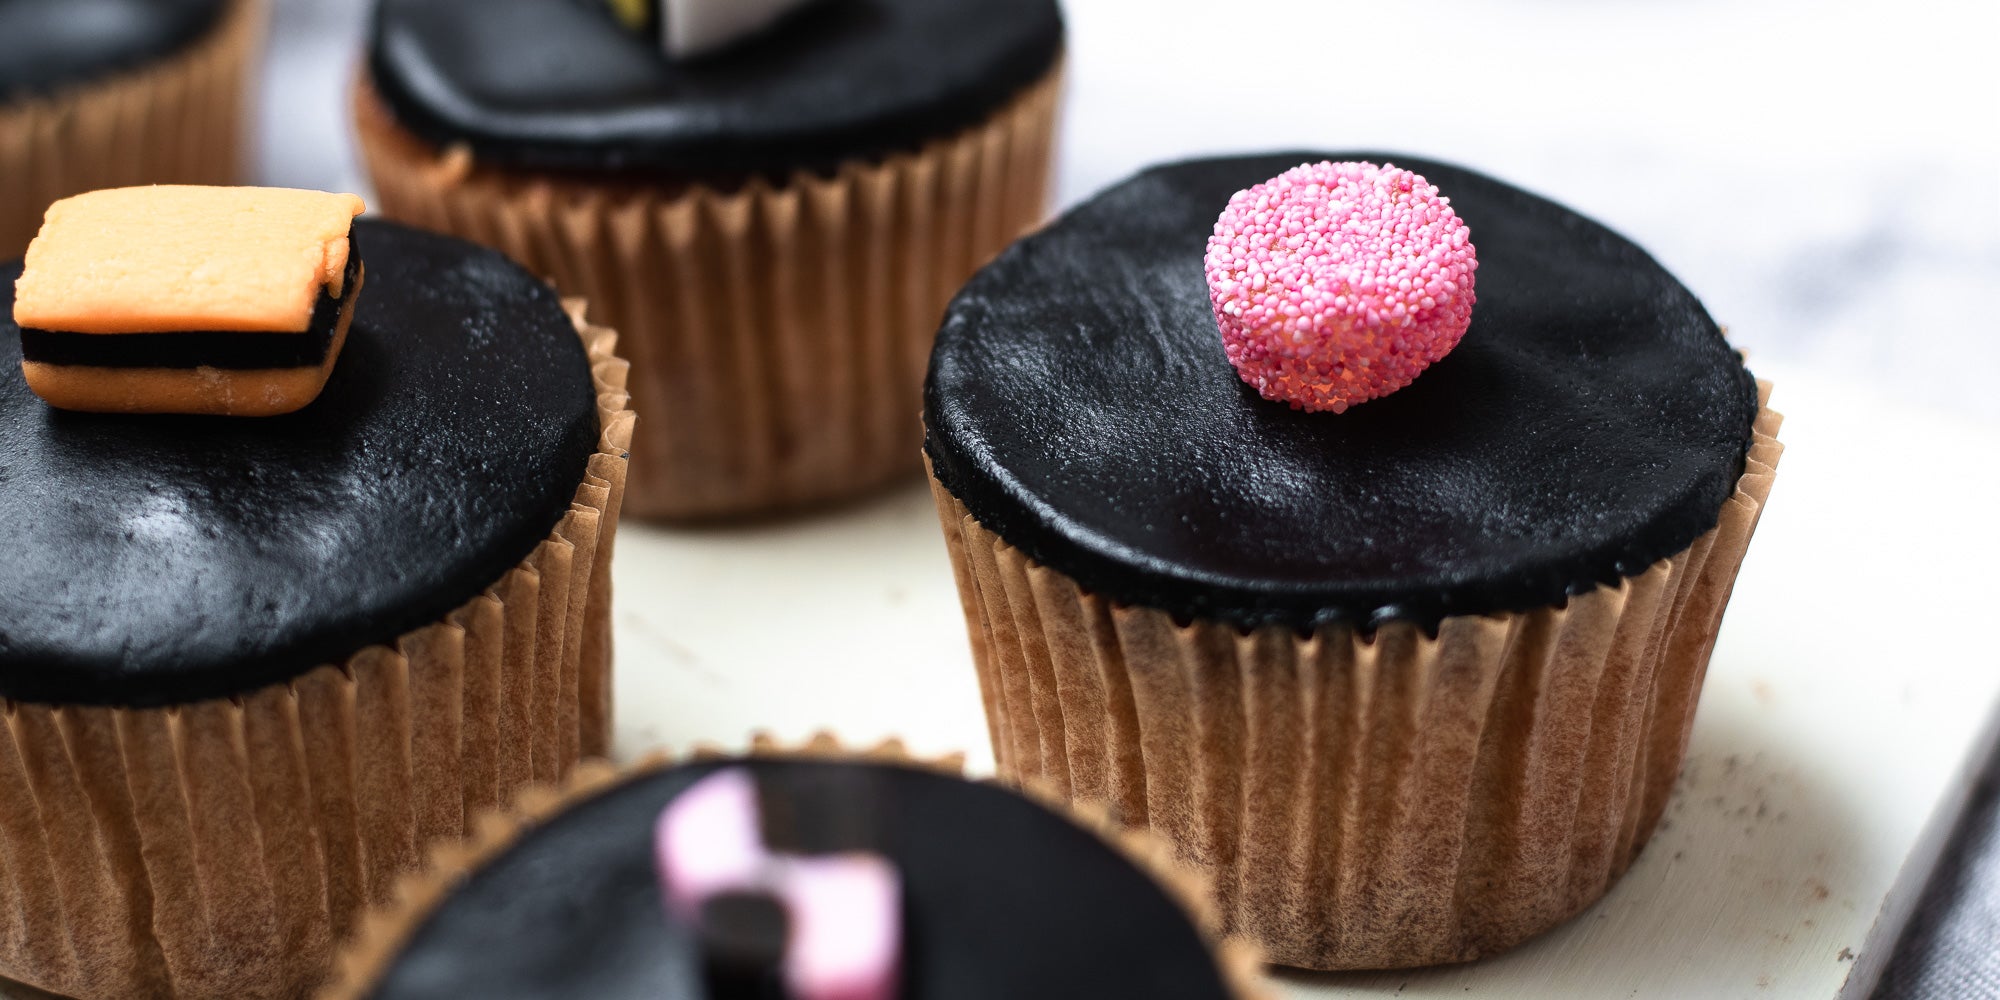 Close up of cupcakes in brown cases, black fondant, topped with liquorice allsorts